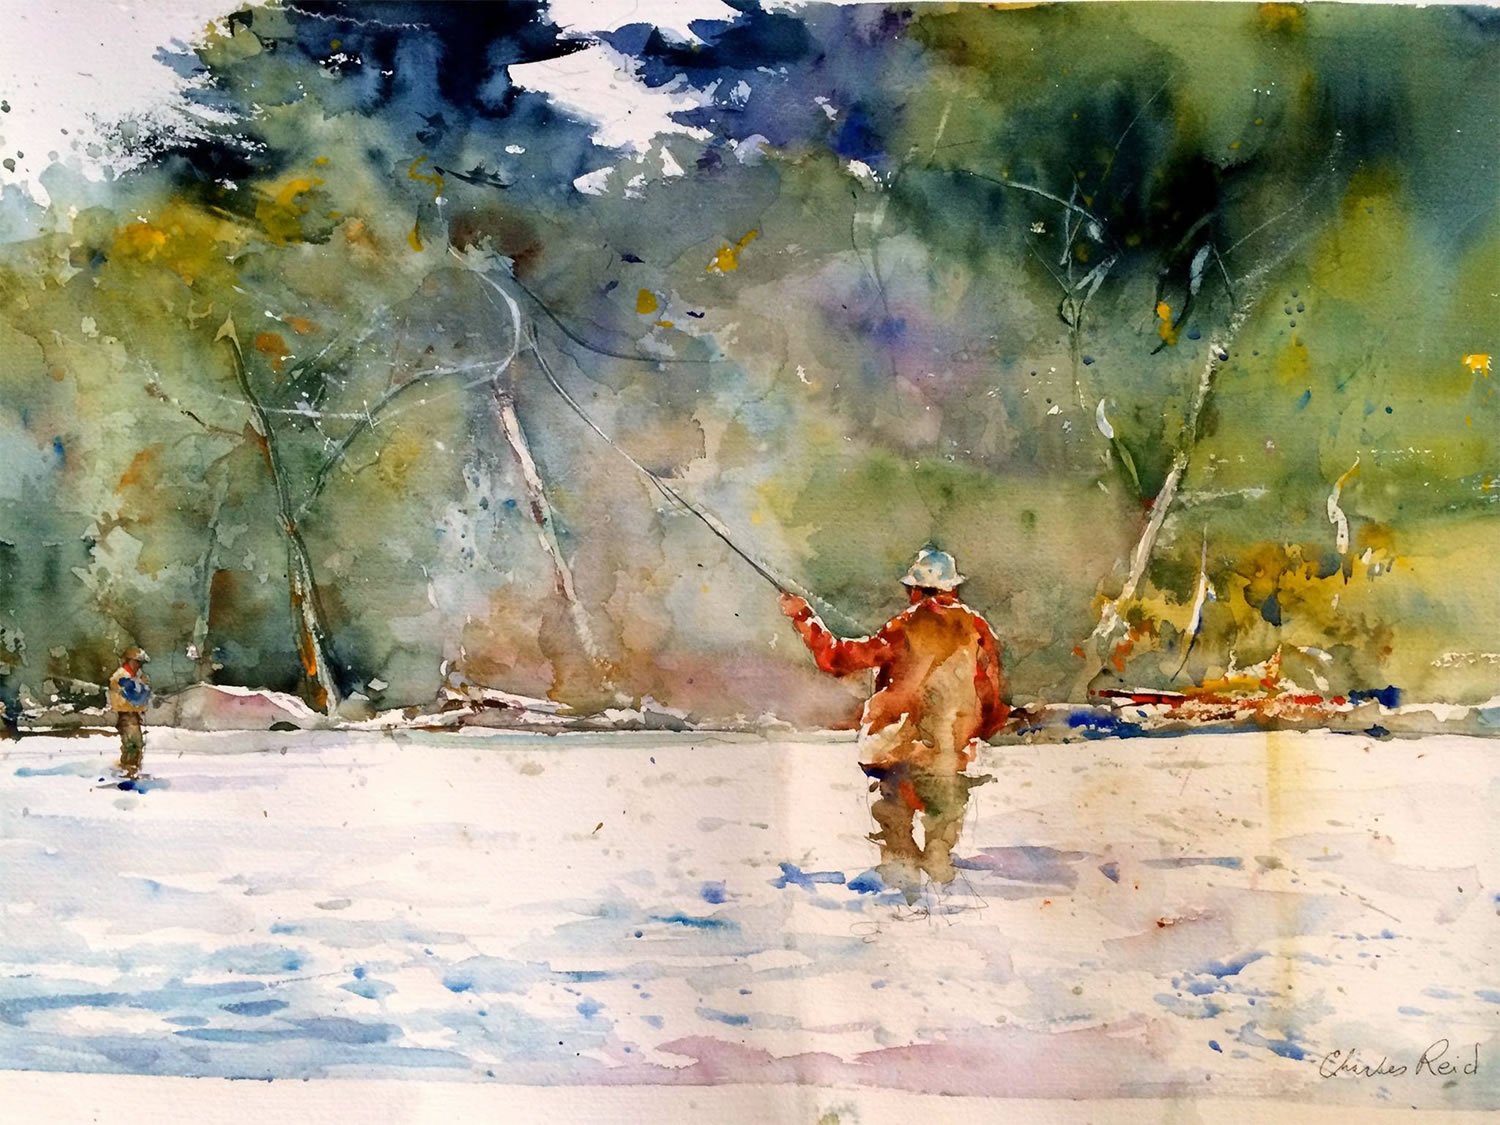 Kyle T Webster on X: A true #watercolor master, Charles Reid